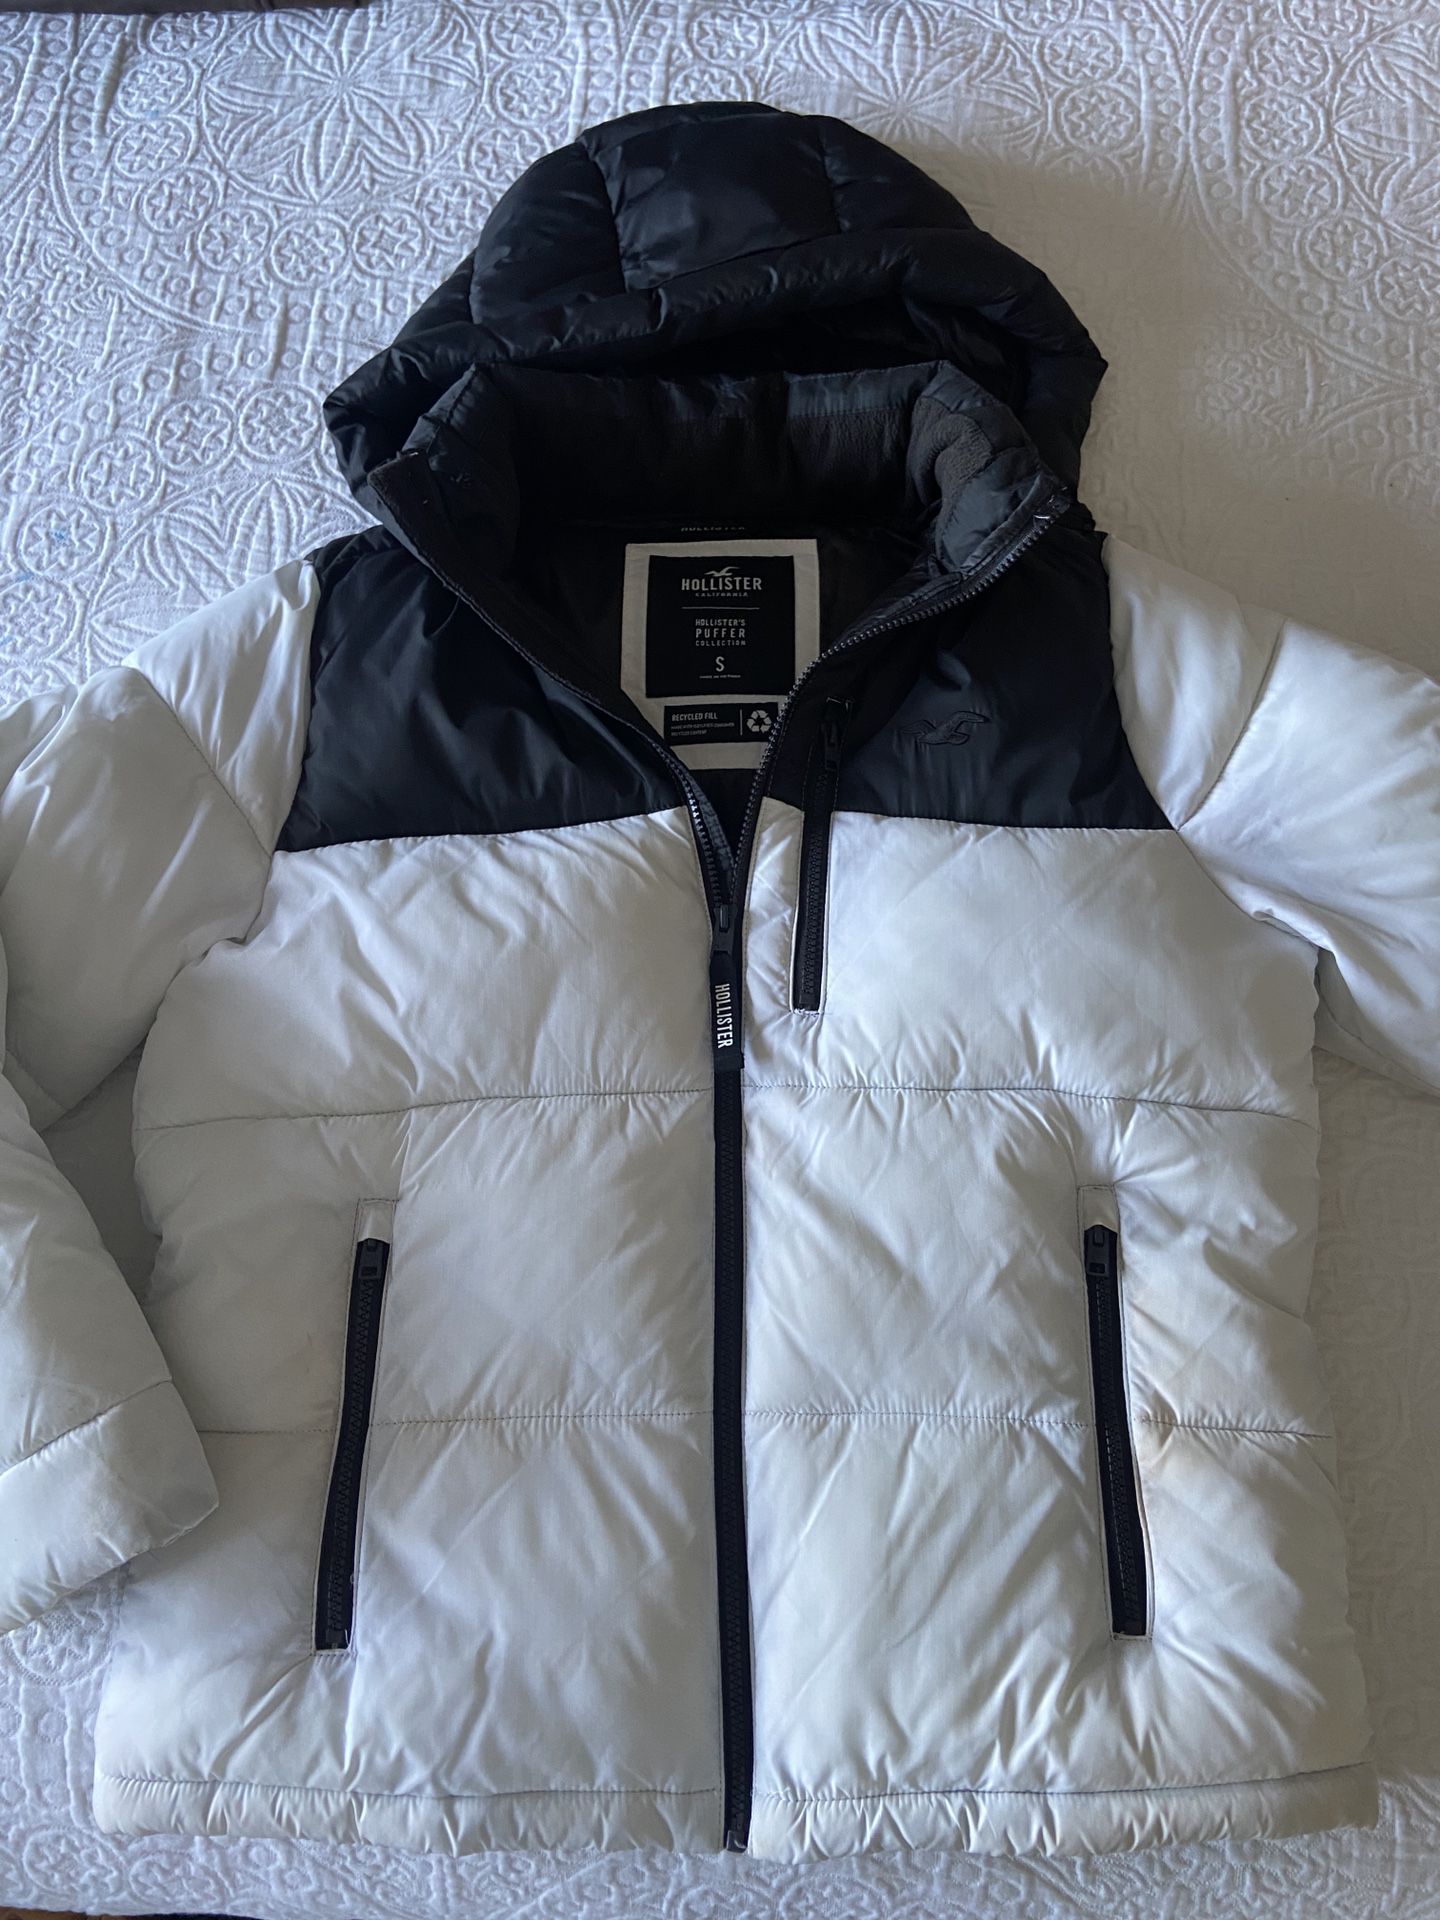 Hollister Puffer Jacket for Sale in Chula Vista, CA - OfferUp